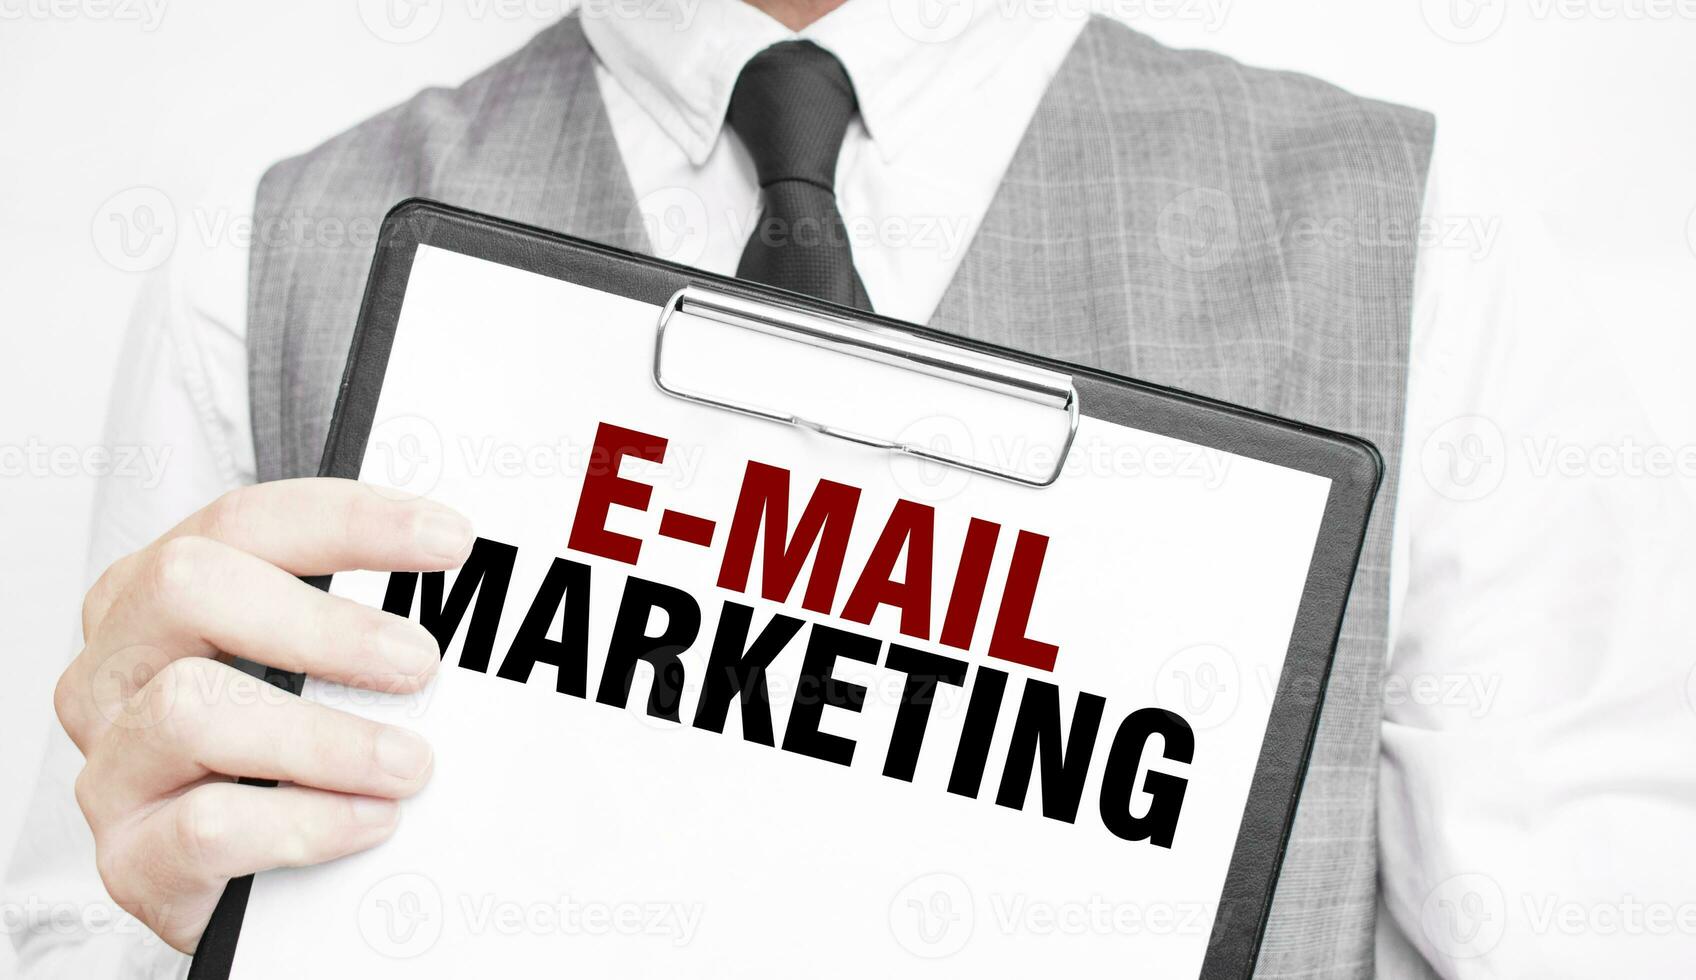 e-mail marketing inscription on a notebook in the hands of a businessman on a gray background, a man points with a finger to the text photo